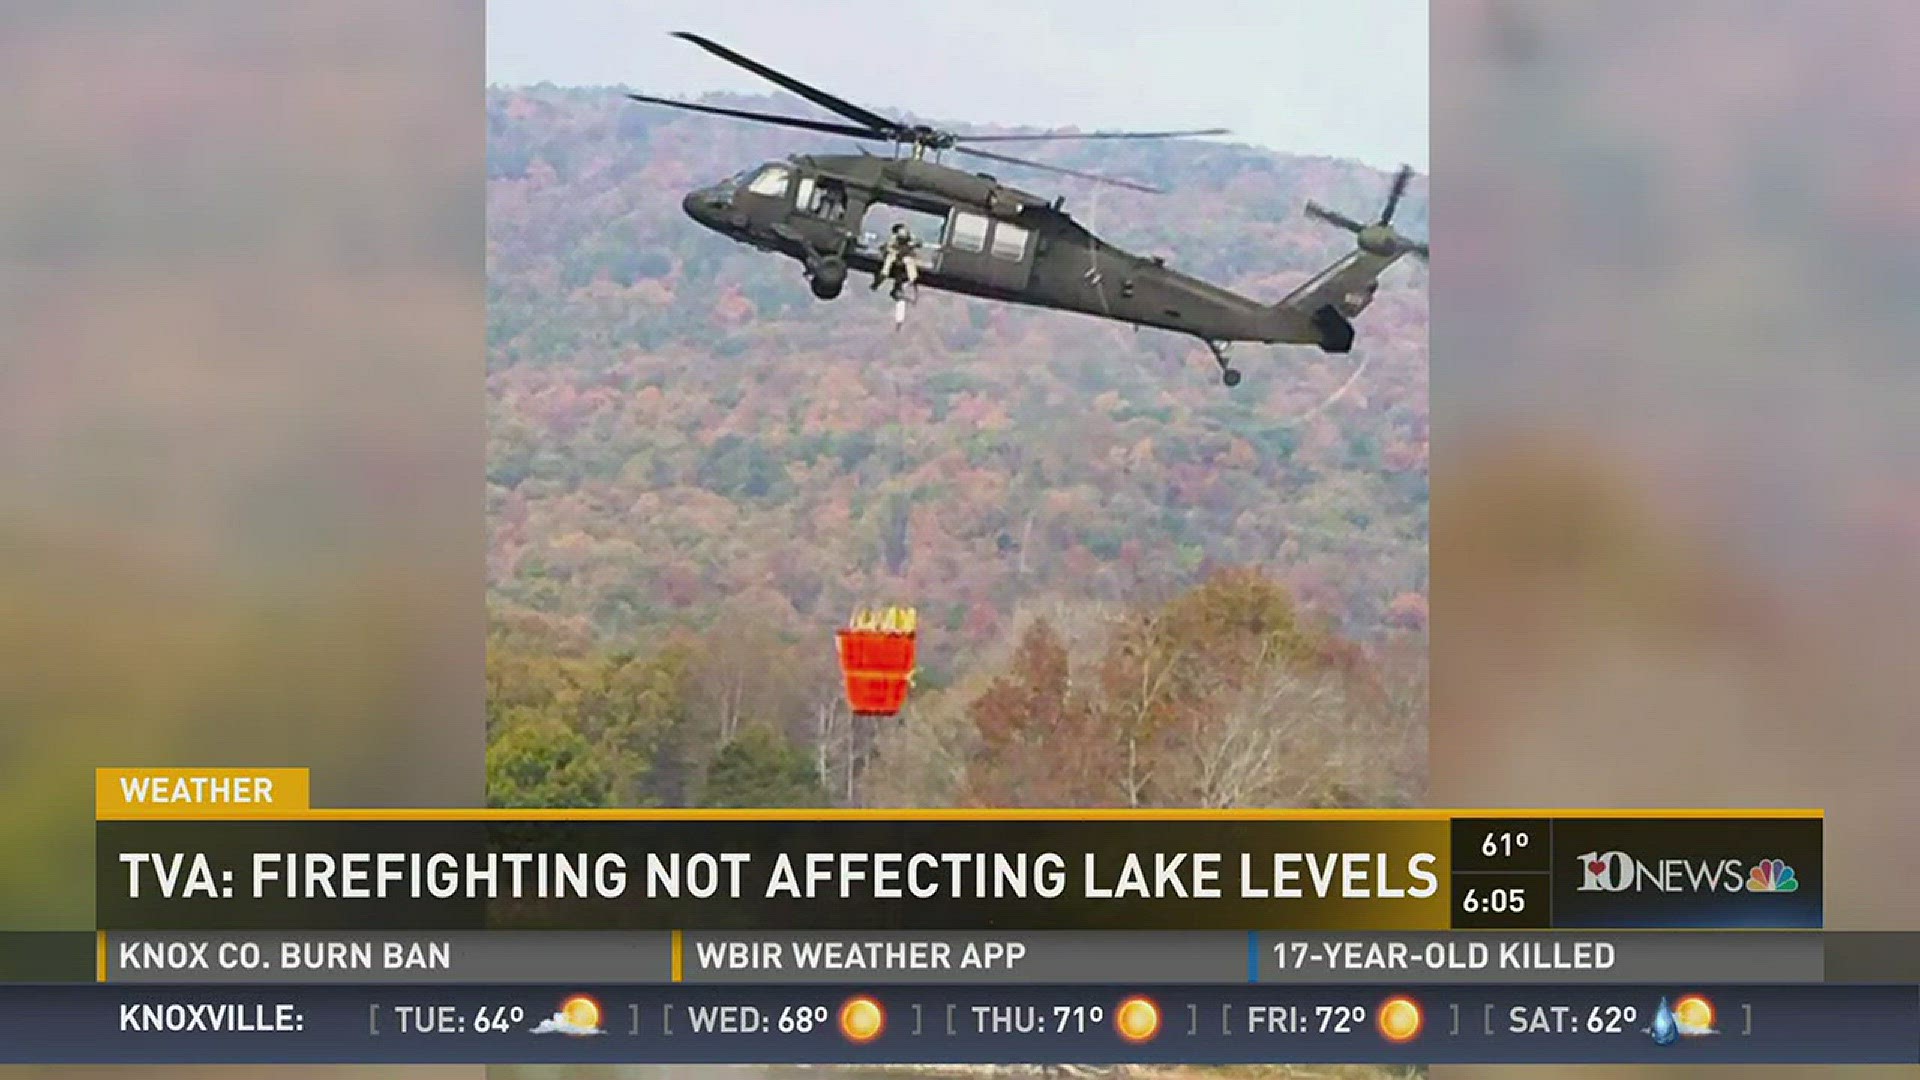 Nov. 14, 2016: Firefighting crews are using water from TVA lakes to battle wildfires across our region, but TVA representatives say this is not impacting lake levels.